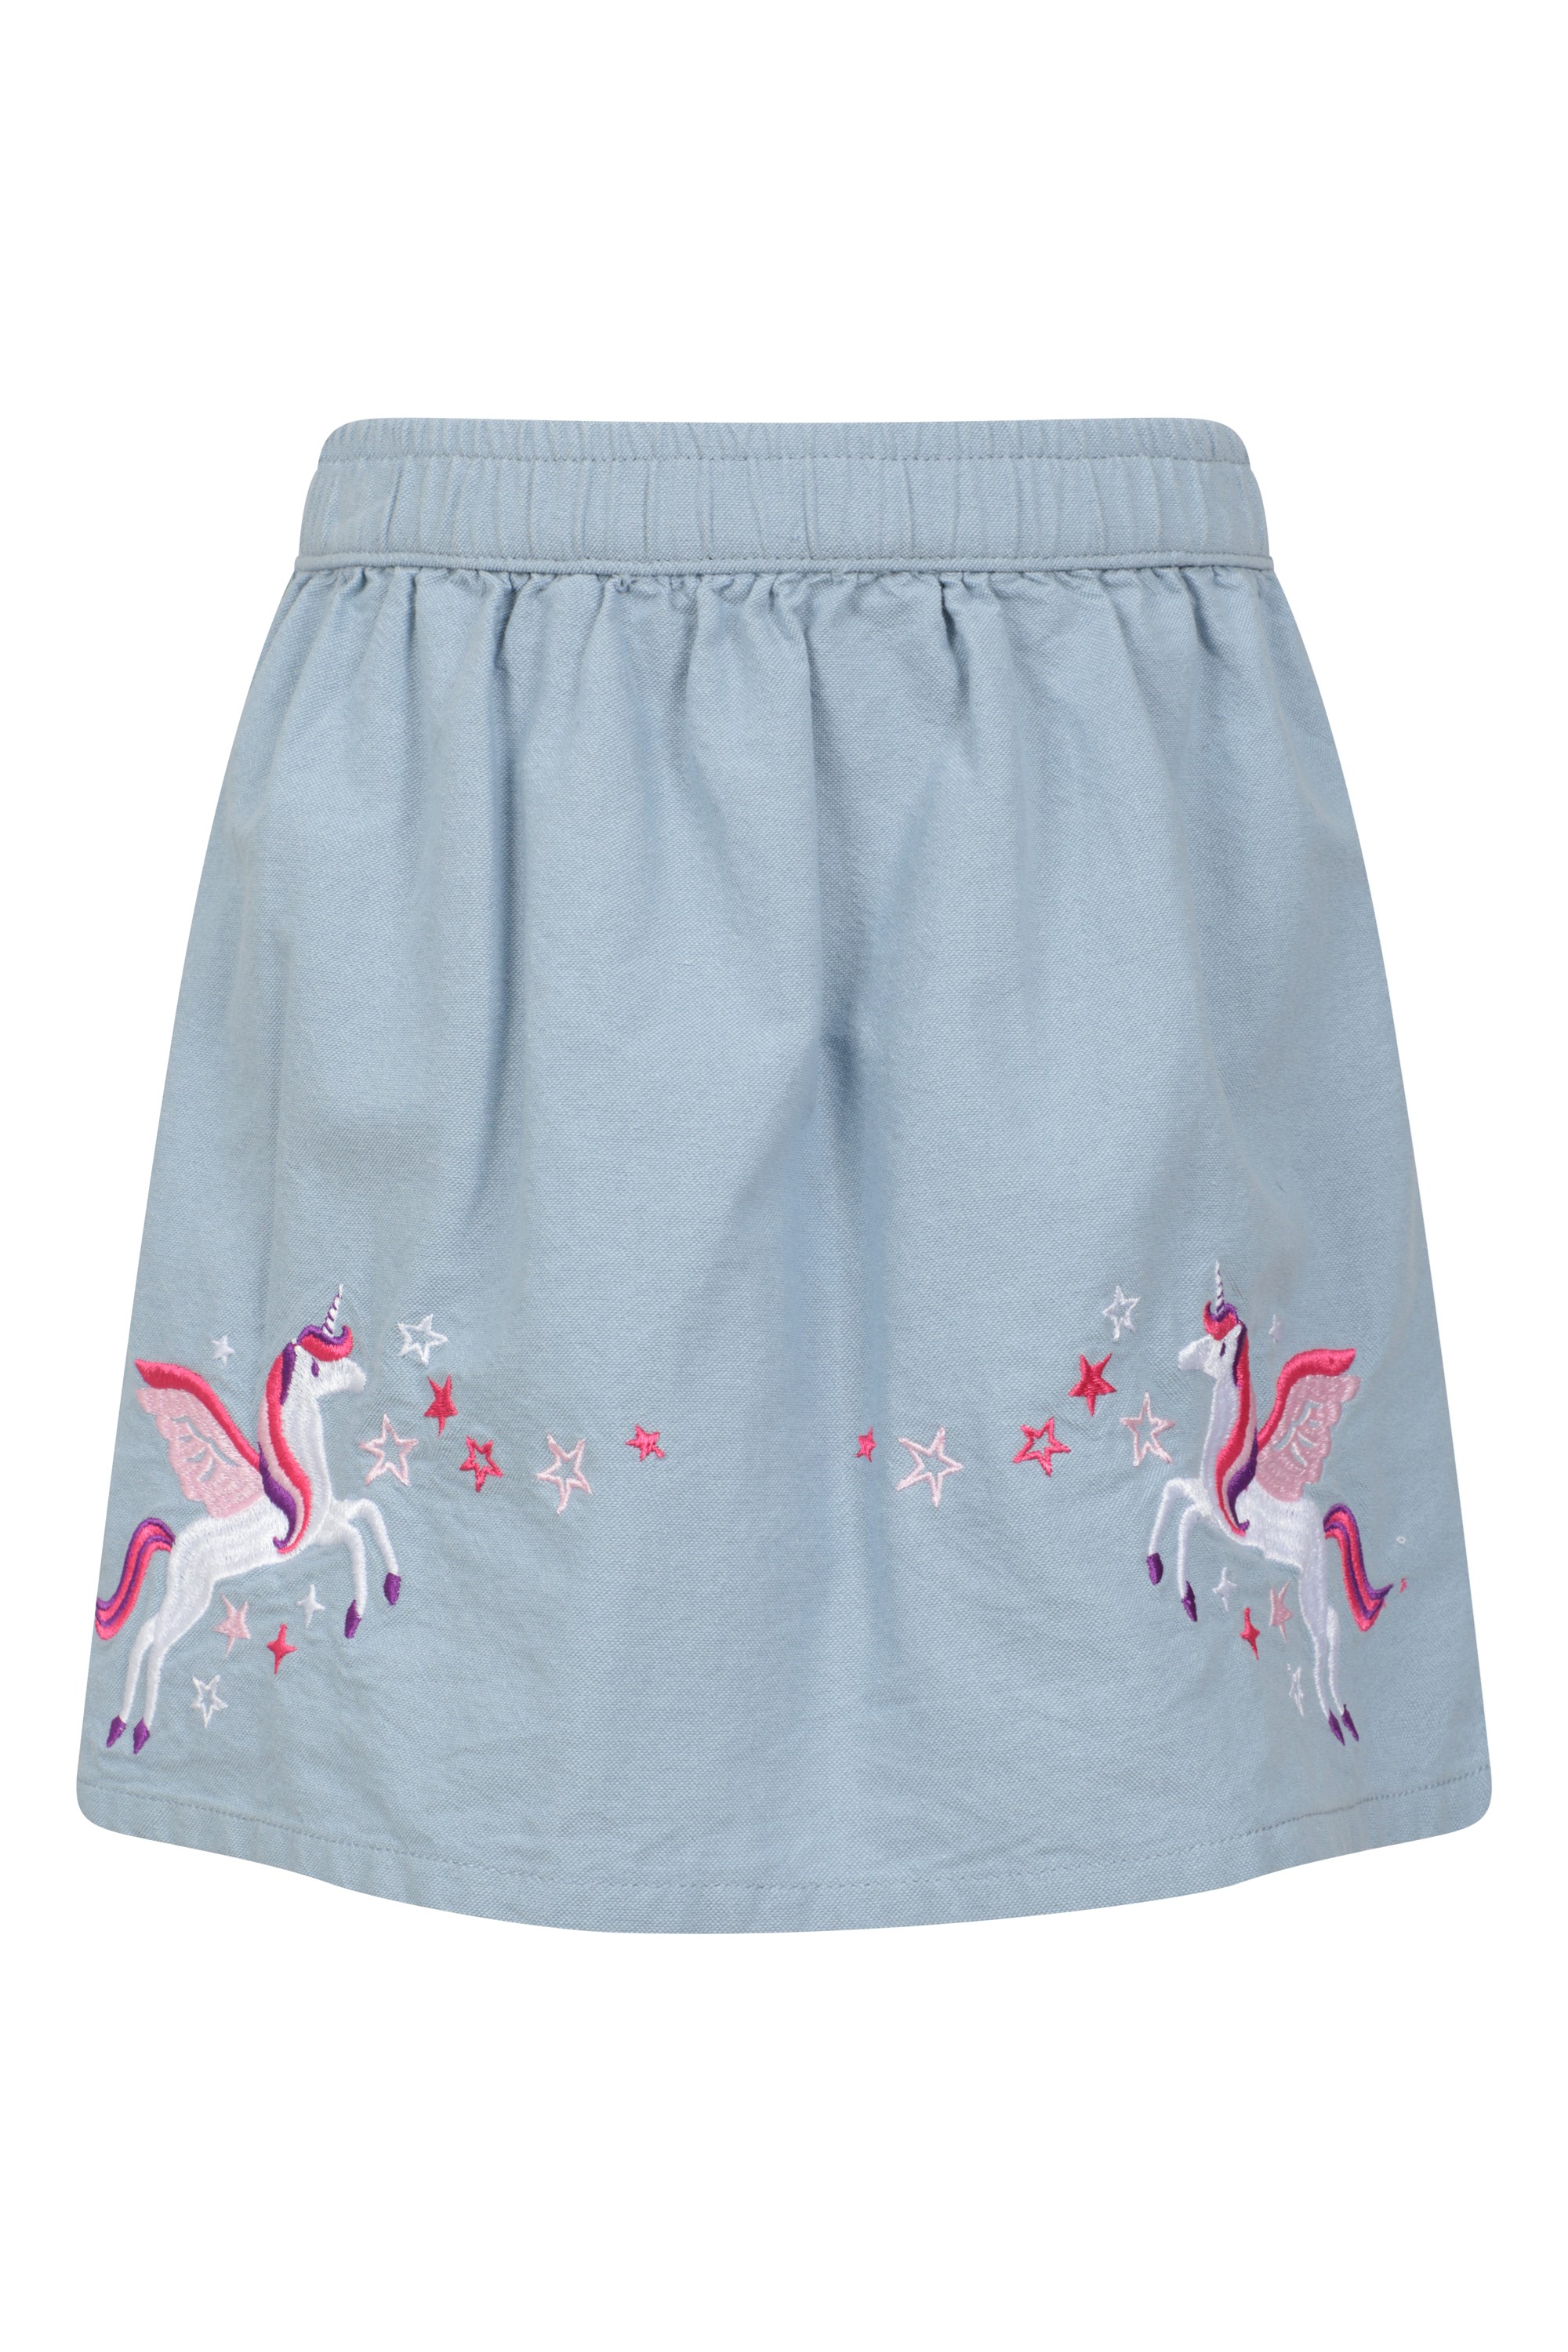 Kids Embroidered Chambray Skirt - Blue